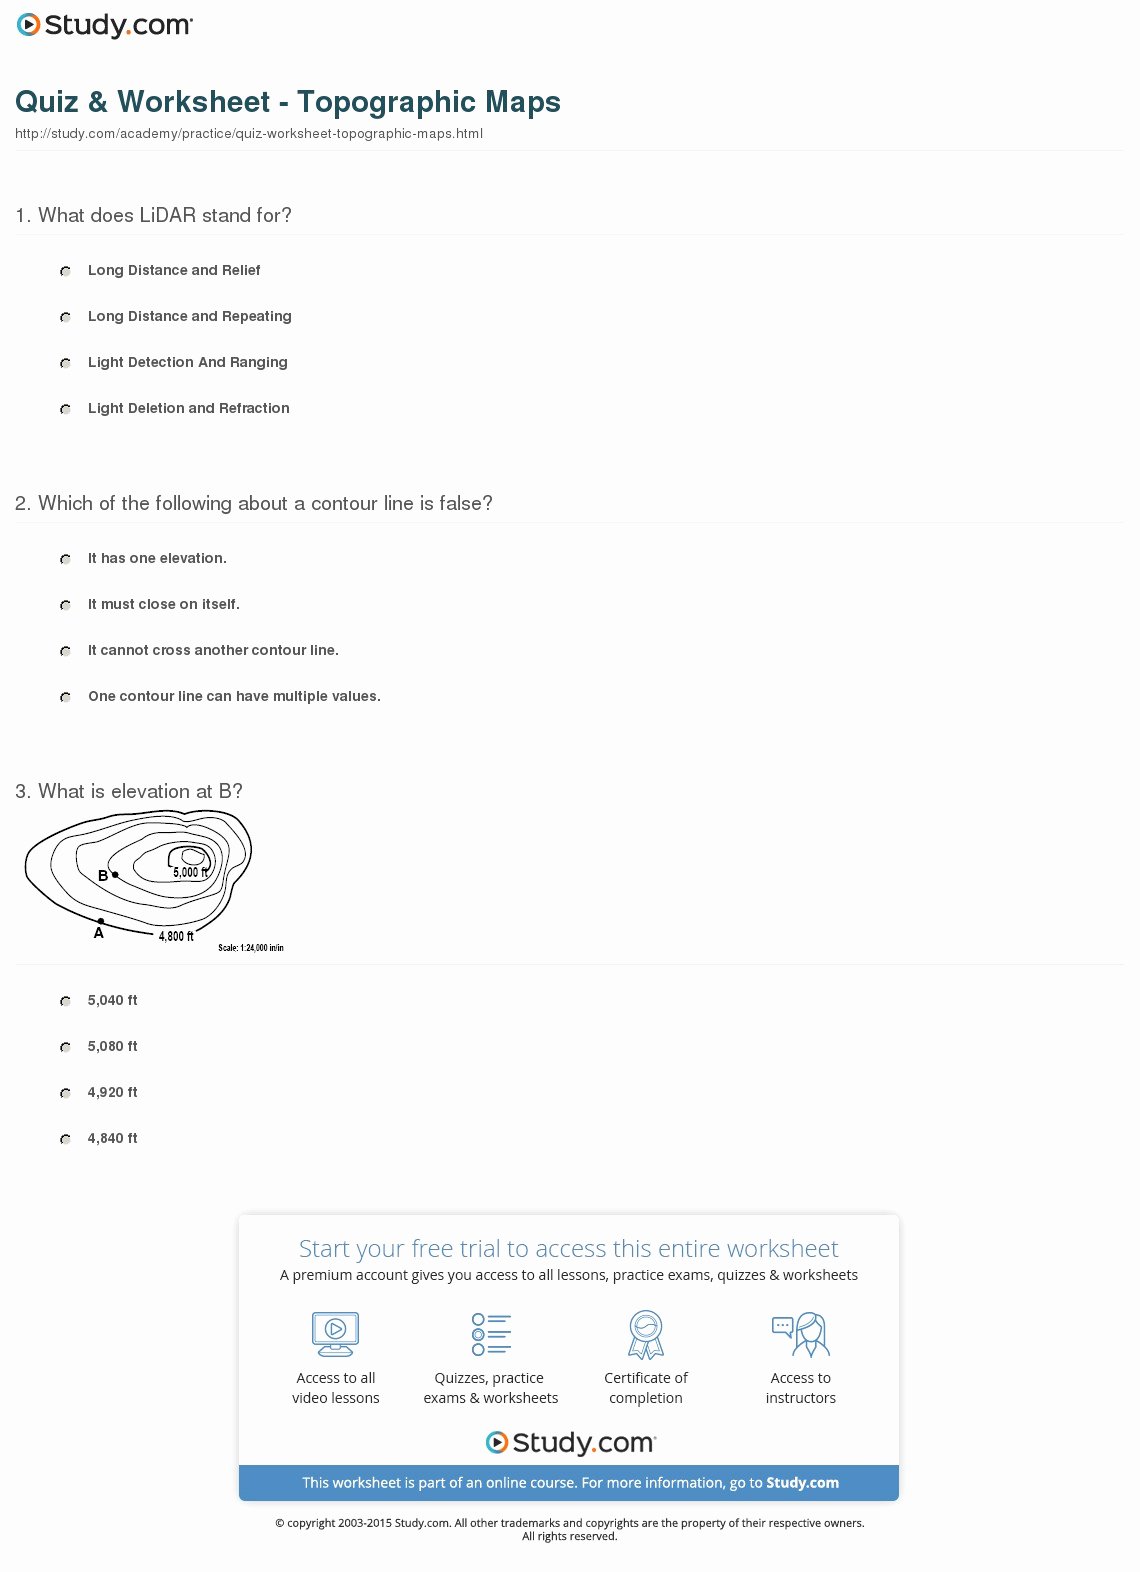 Topographic Map Reading Worksheet Awesome Quiz &amp; Worksheet topographic Maps